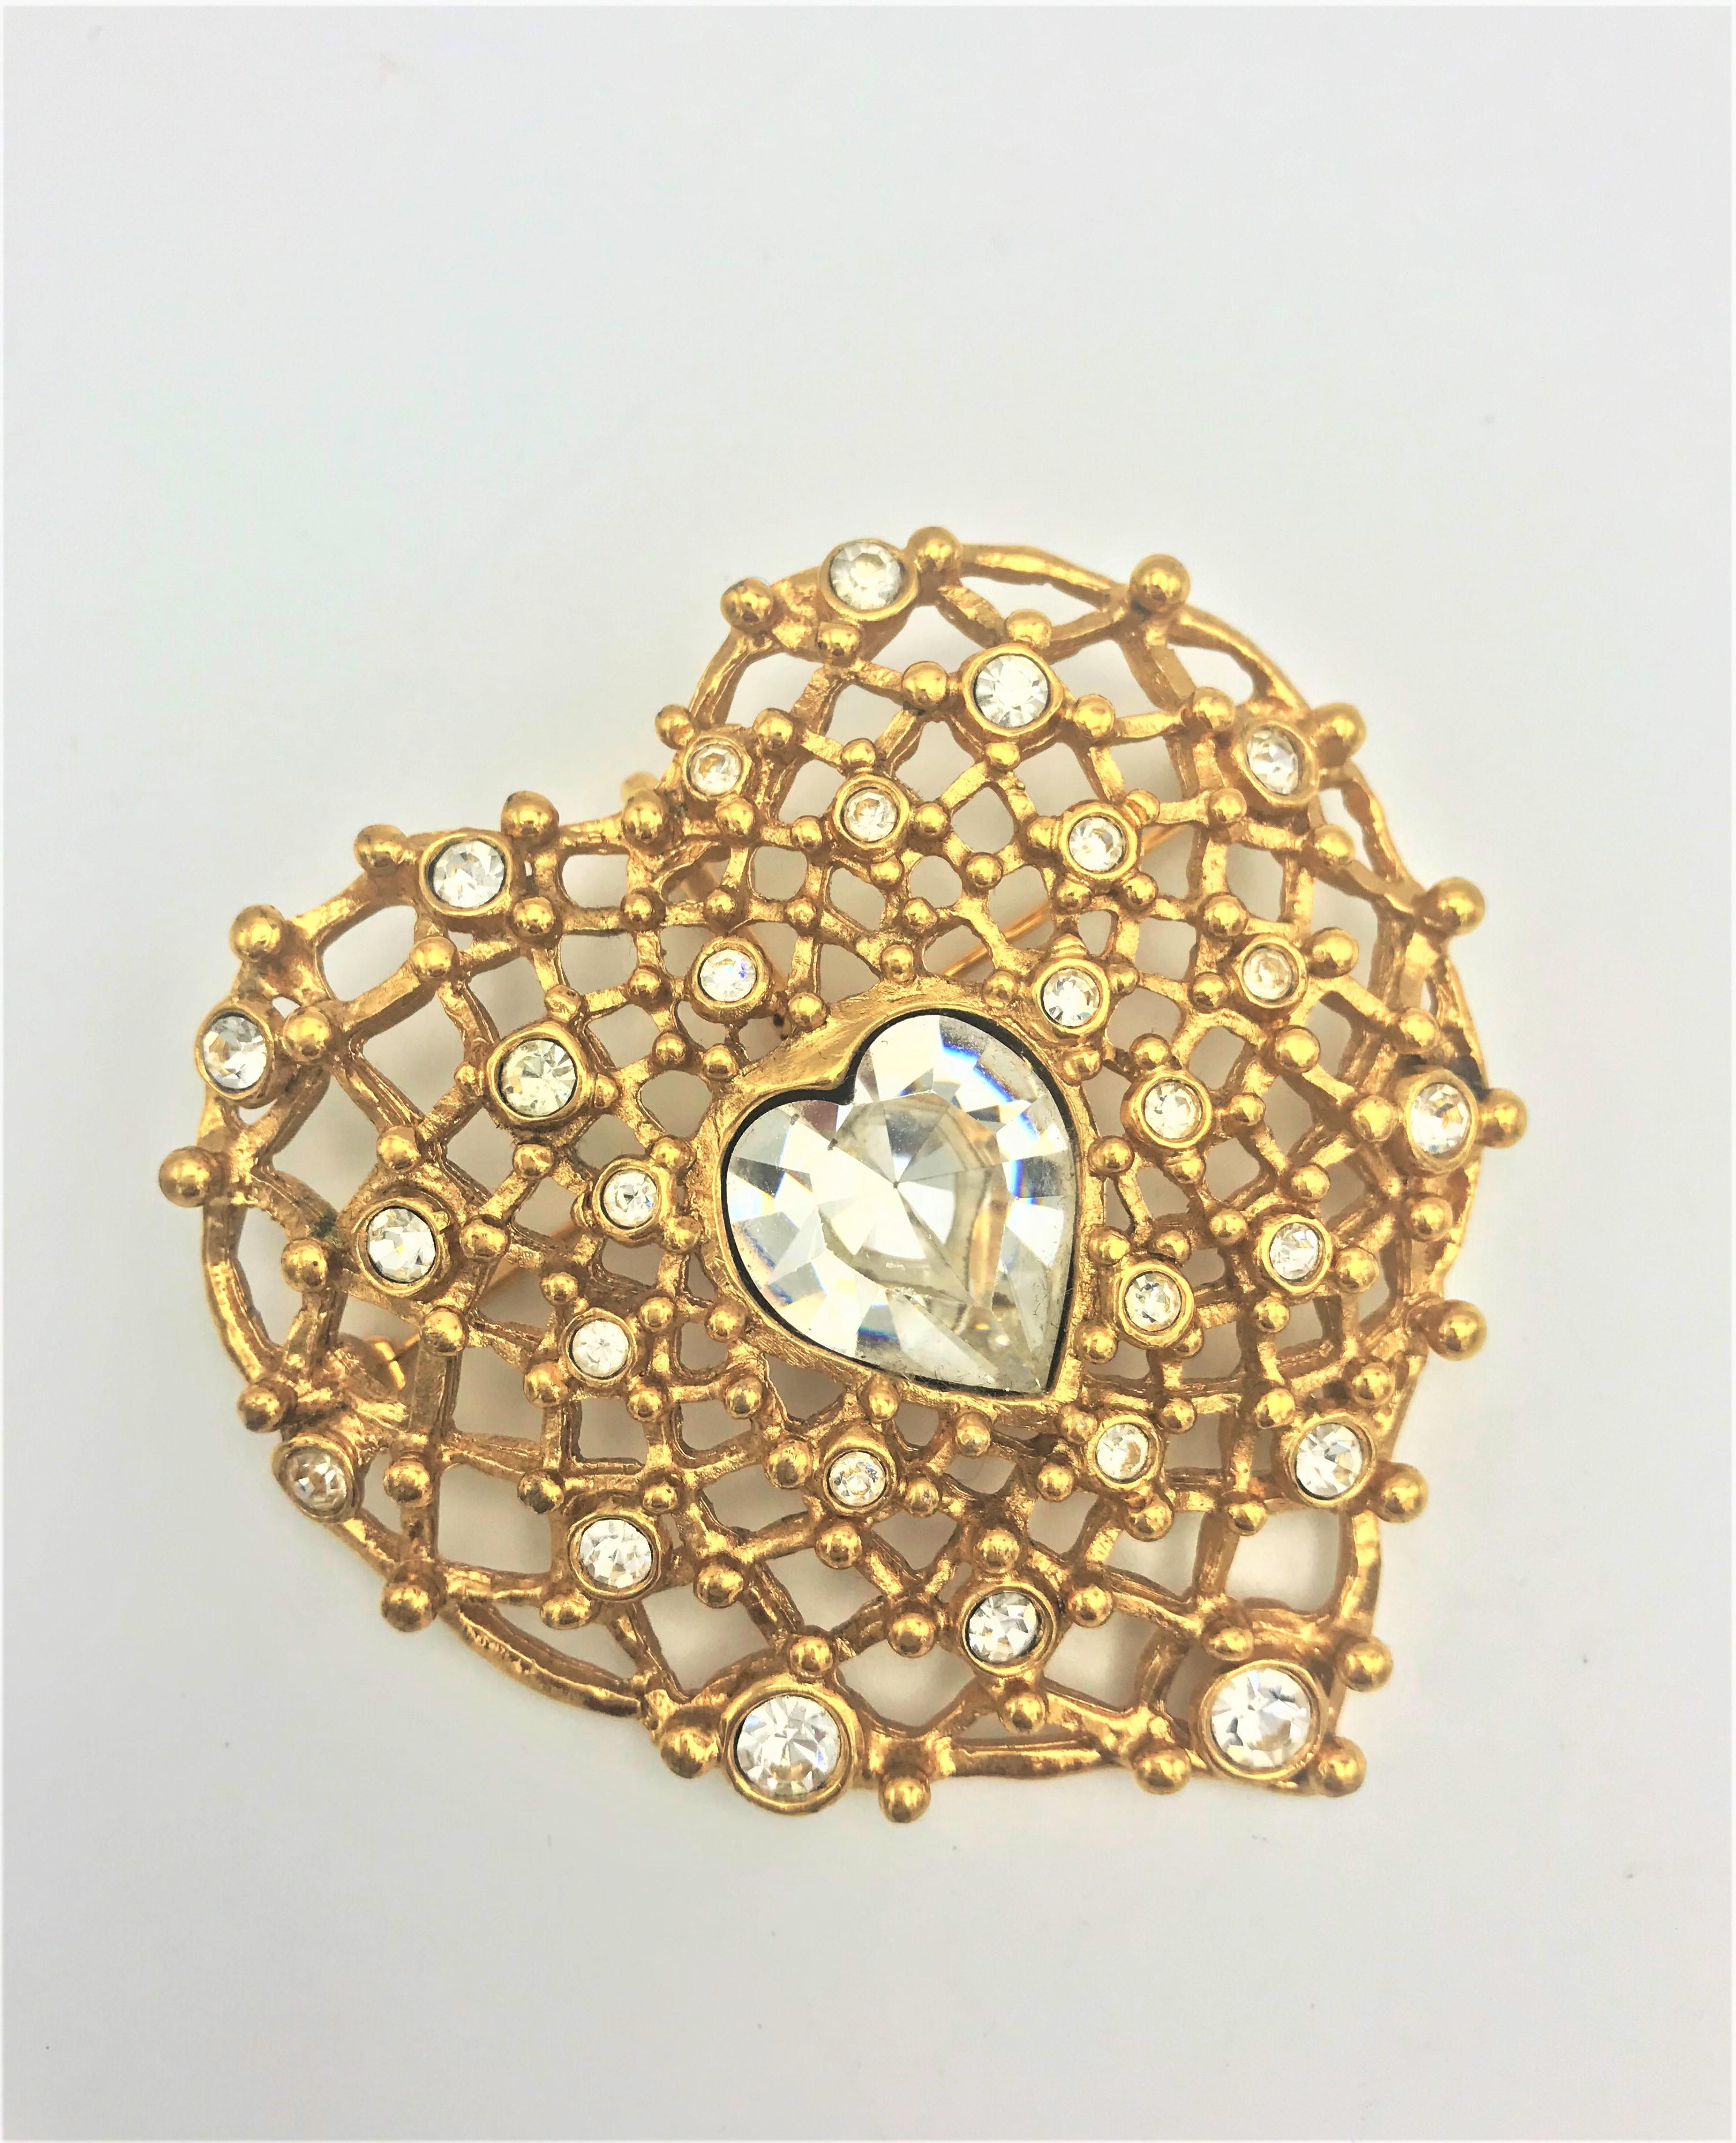 Yves St. Laurent Paris heart brooch with rhinestones gold plated 1980/90s 1